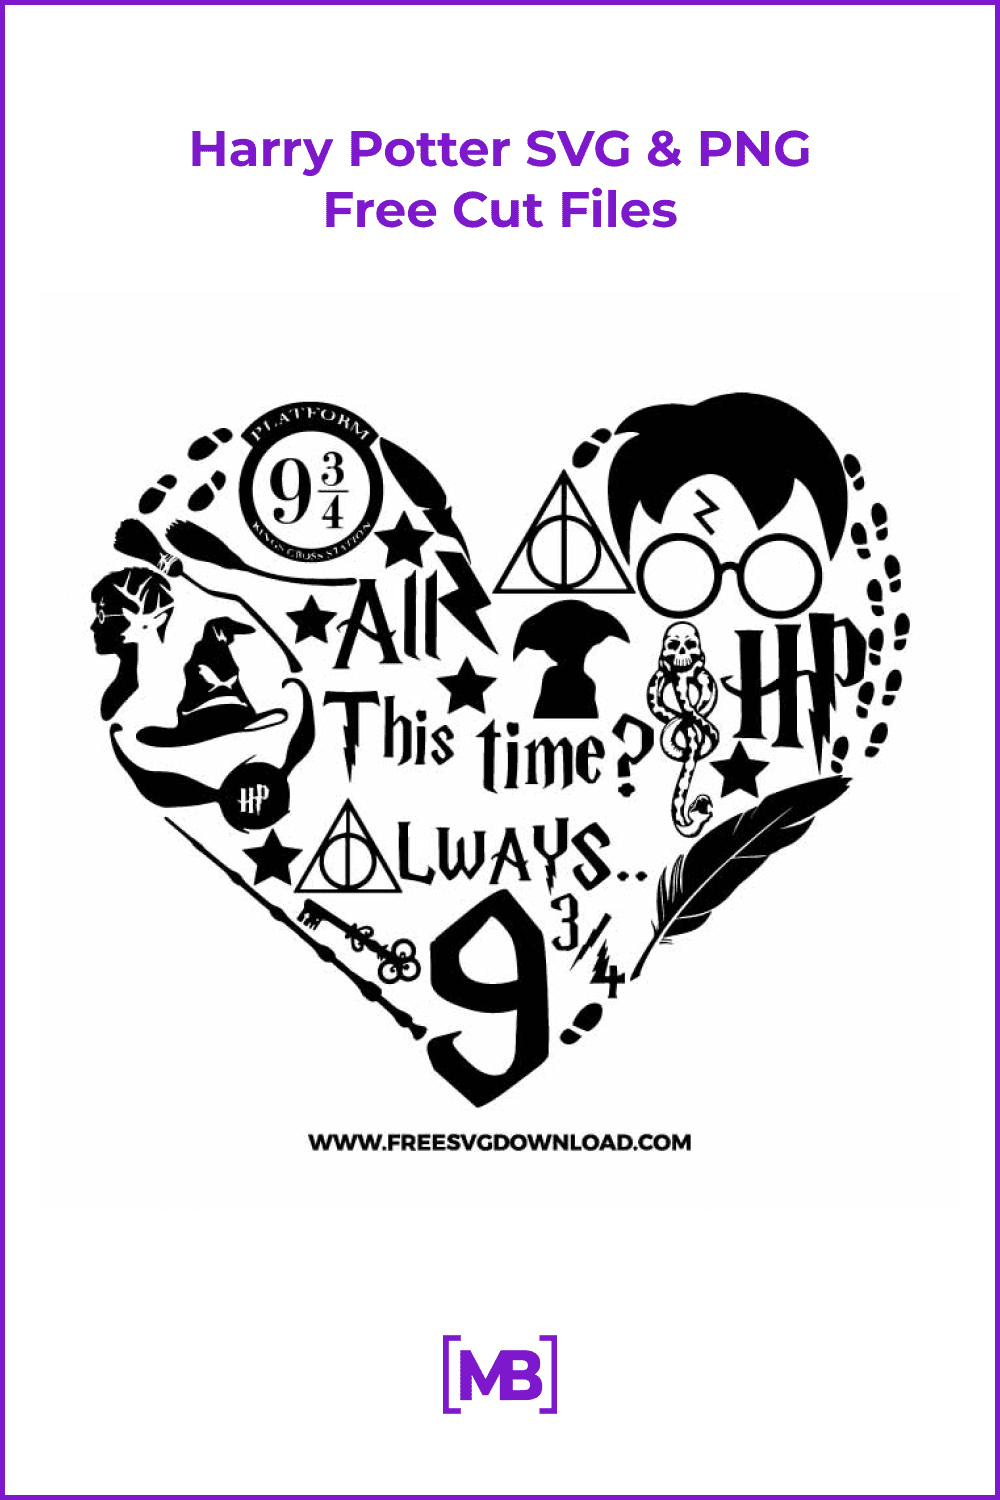 40+ Best Harry Potter SVG Images 2023: Free and Premium